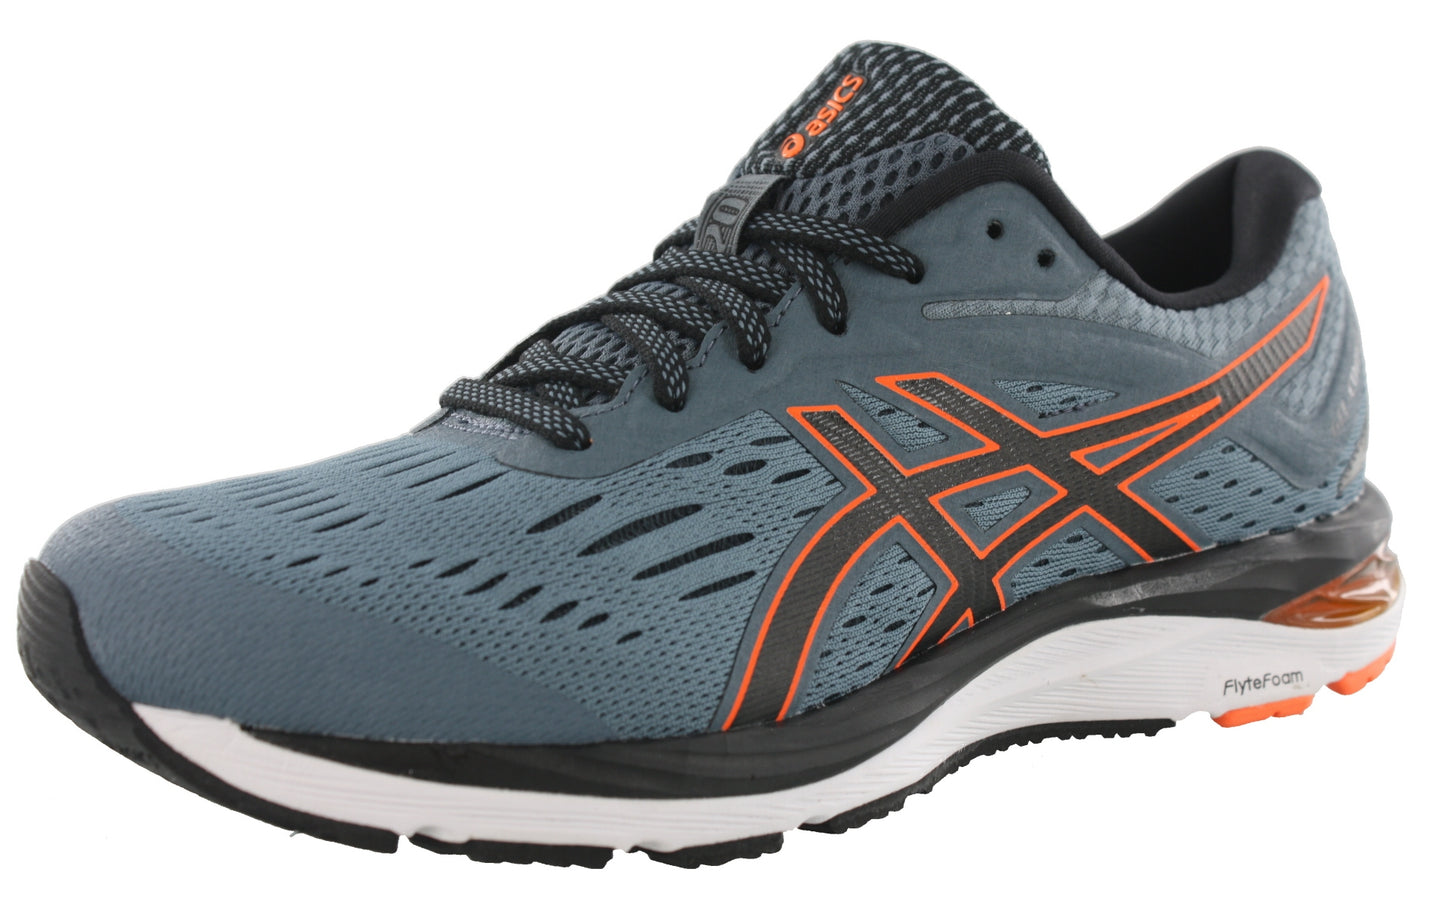 Lateral of IronClad / Black008 ASICS Men Gel Cumulus 20 Cushioned Running Shoes